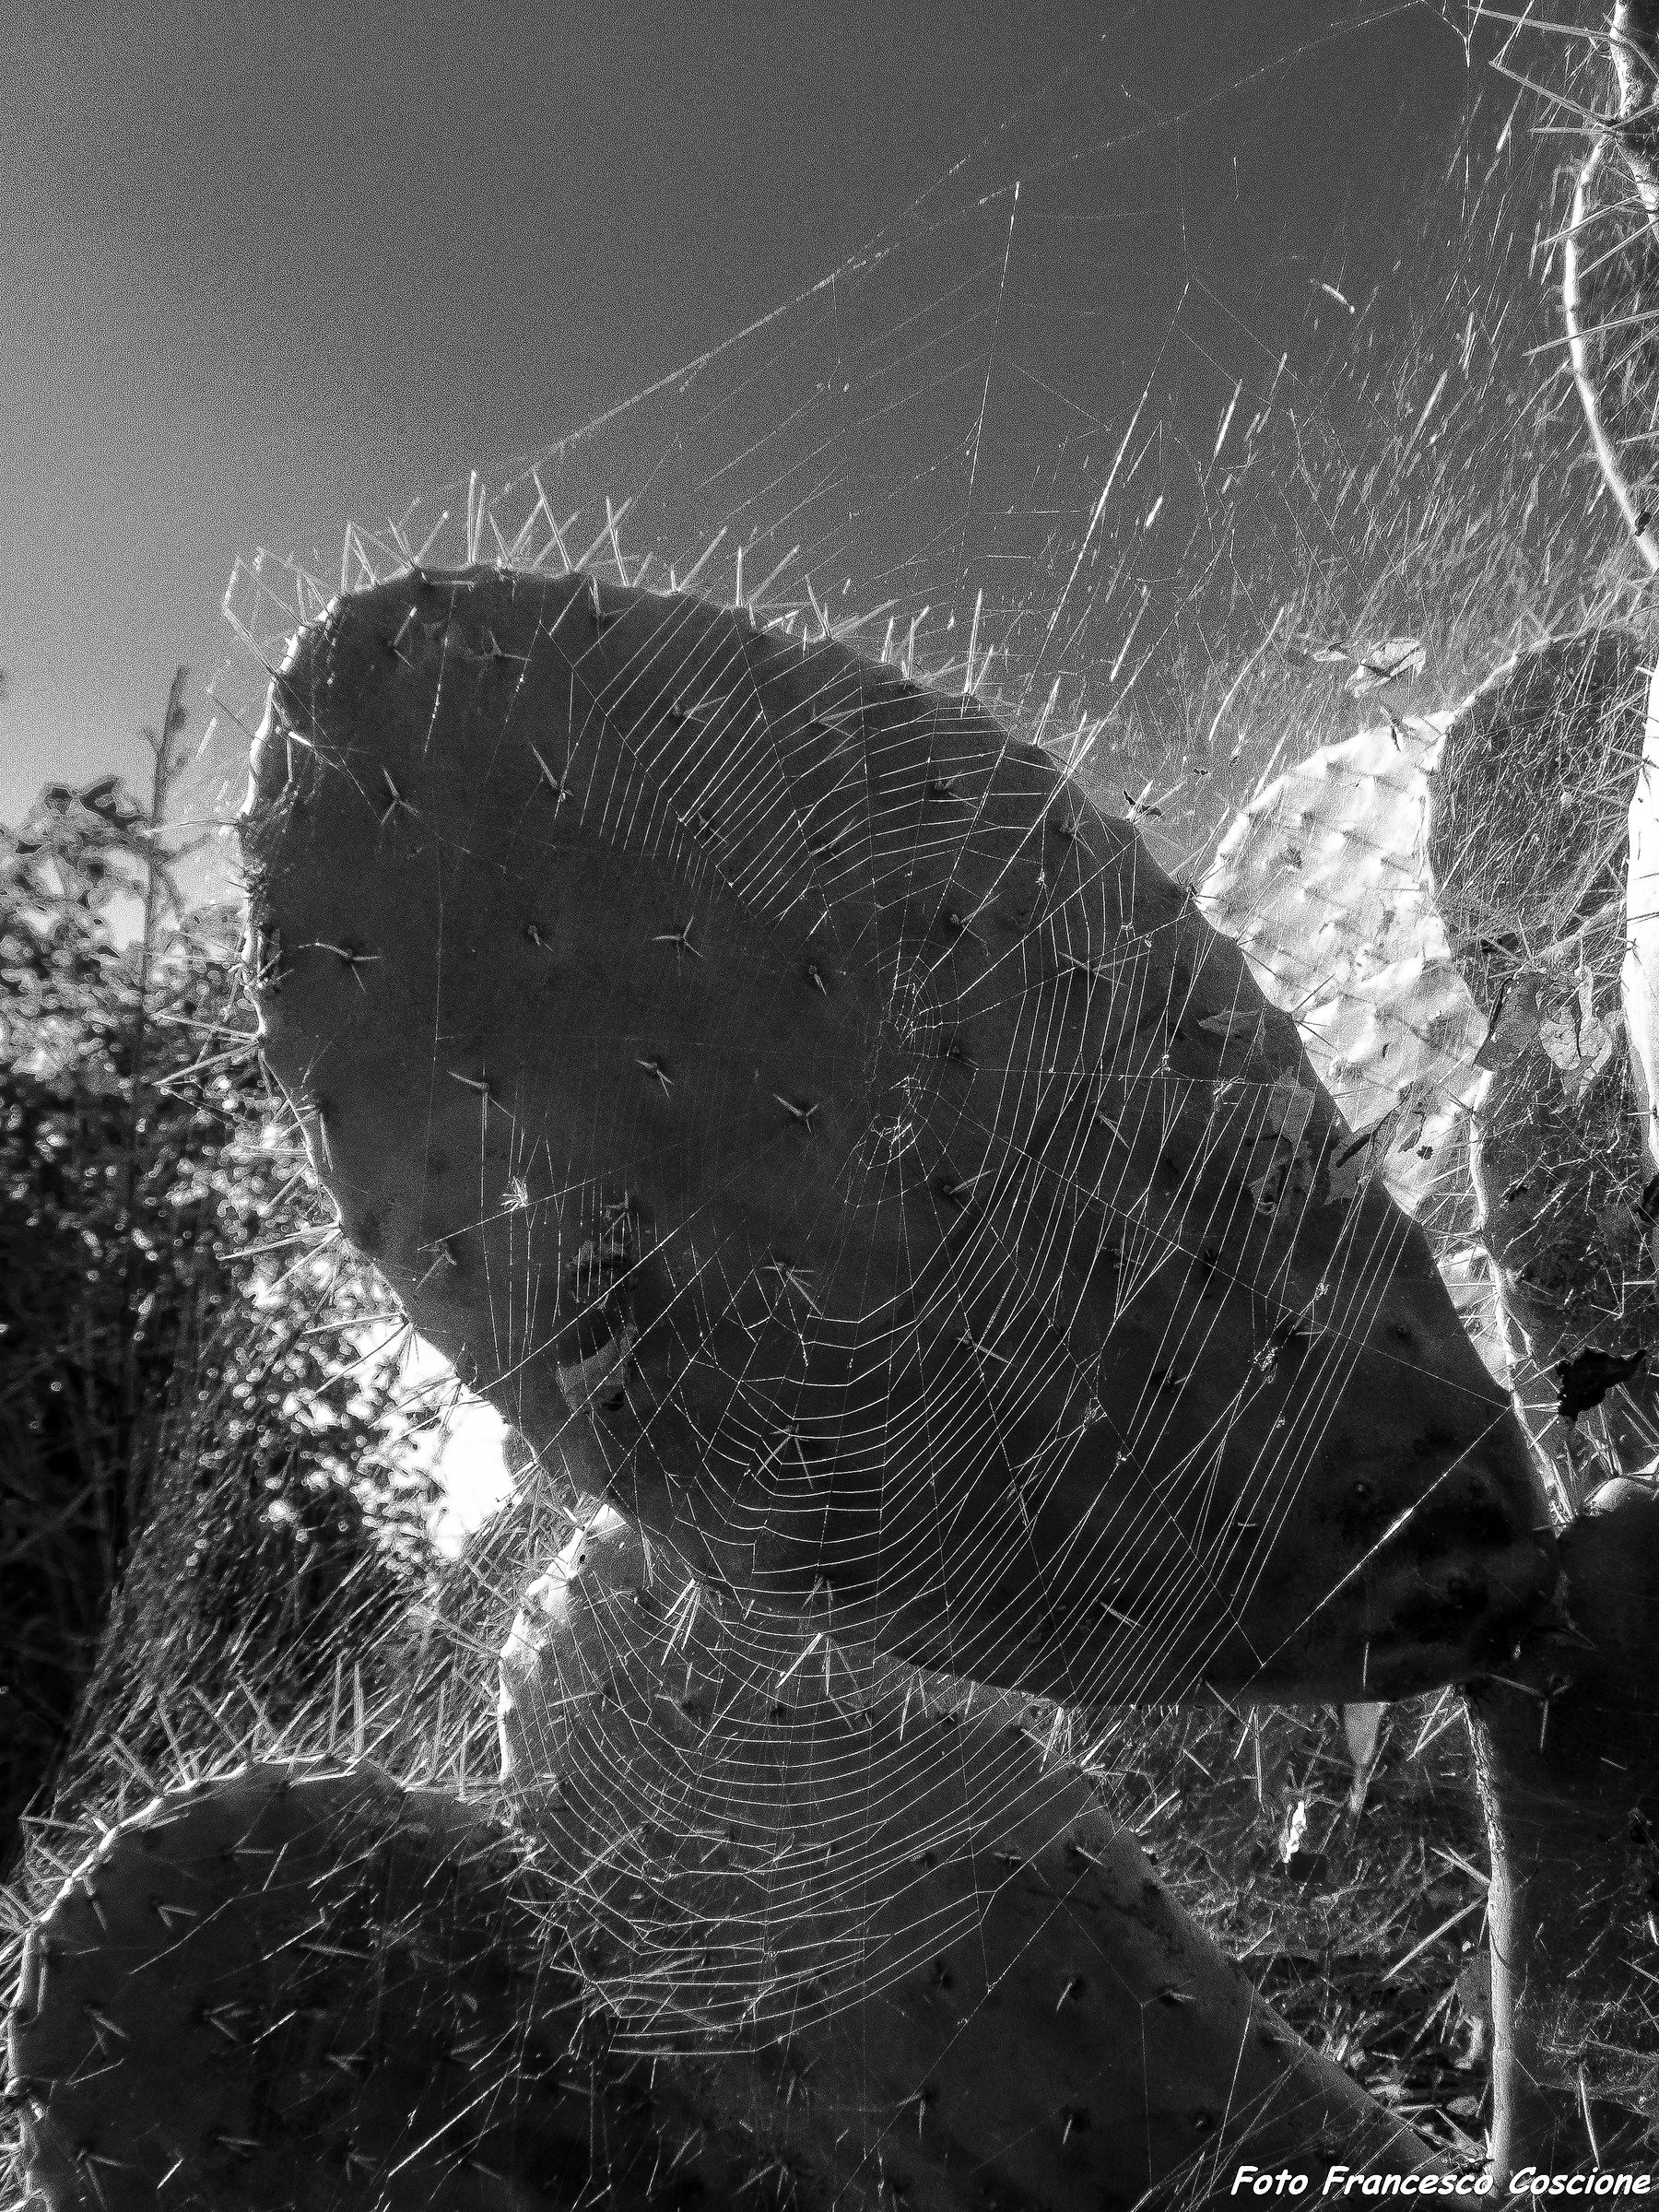 spiderweb of prickly pears...